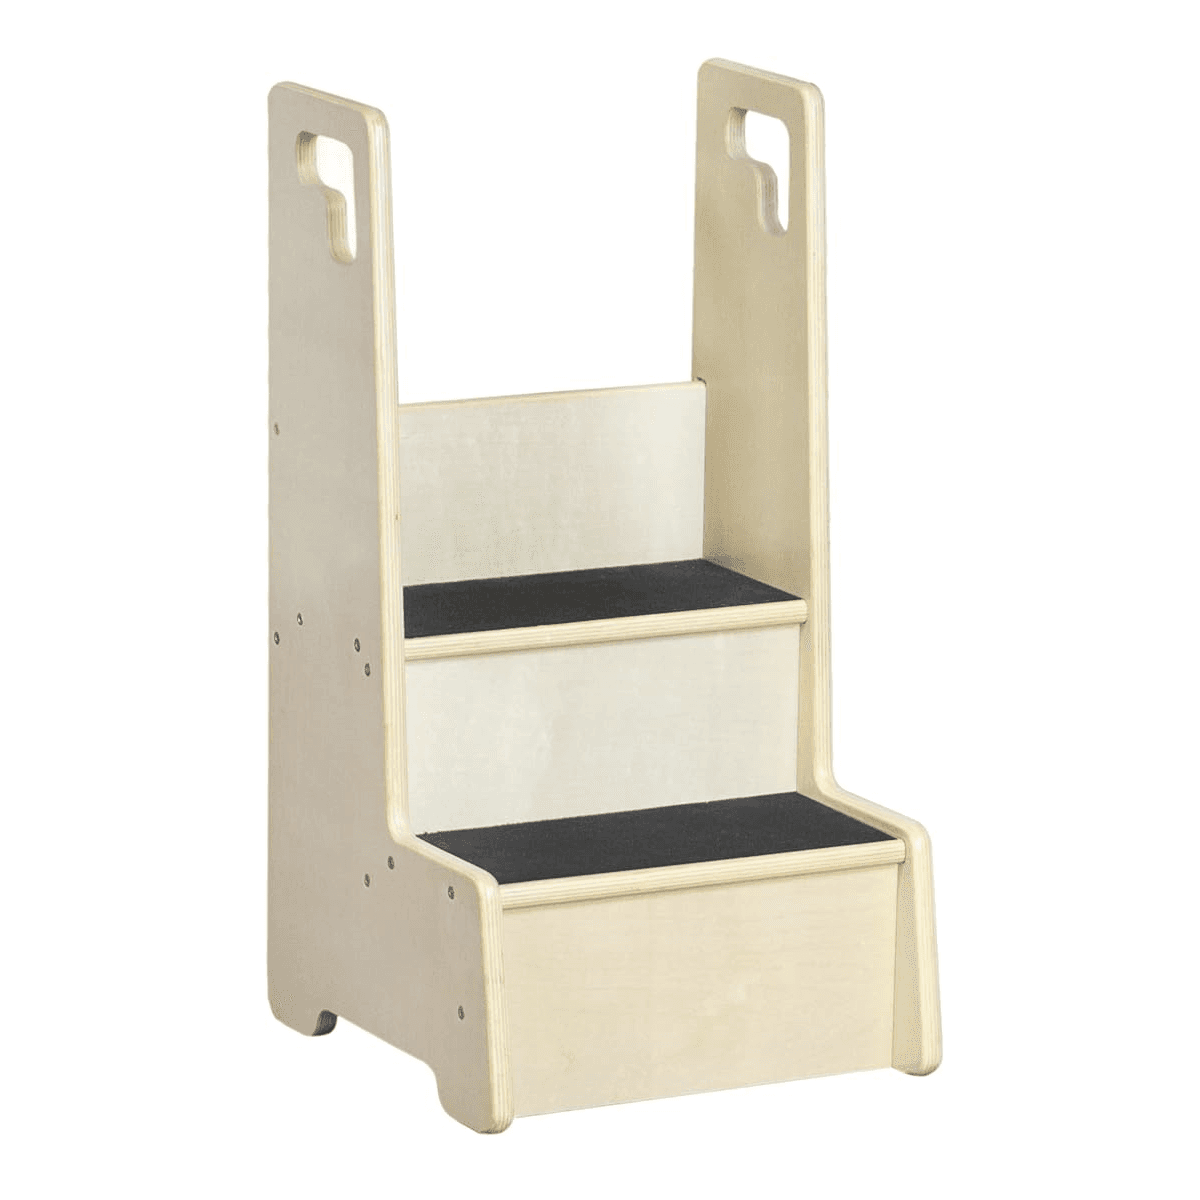 Montessori RRI Goods 2 Step Up Stool With Support Handles and Non Slip